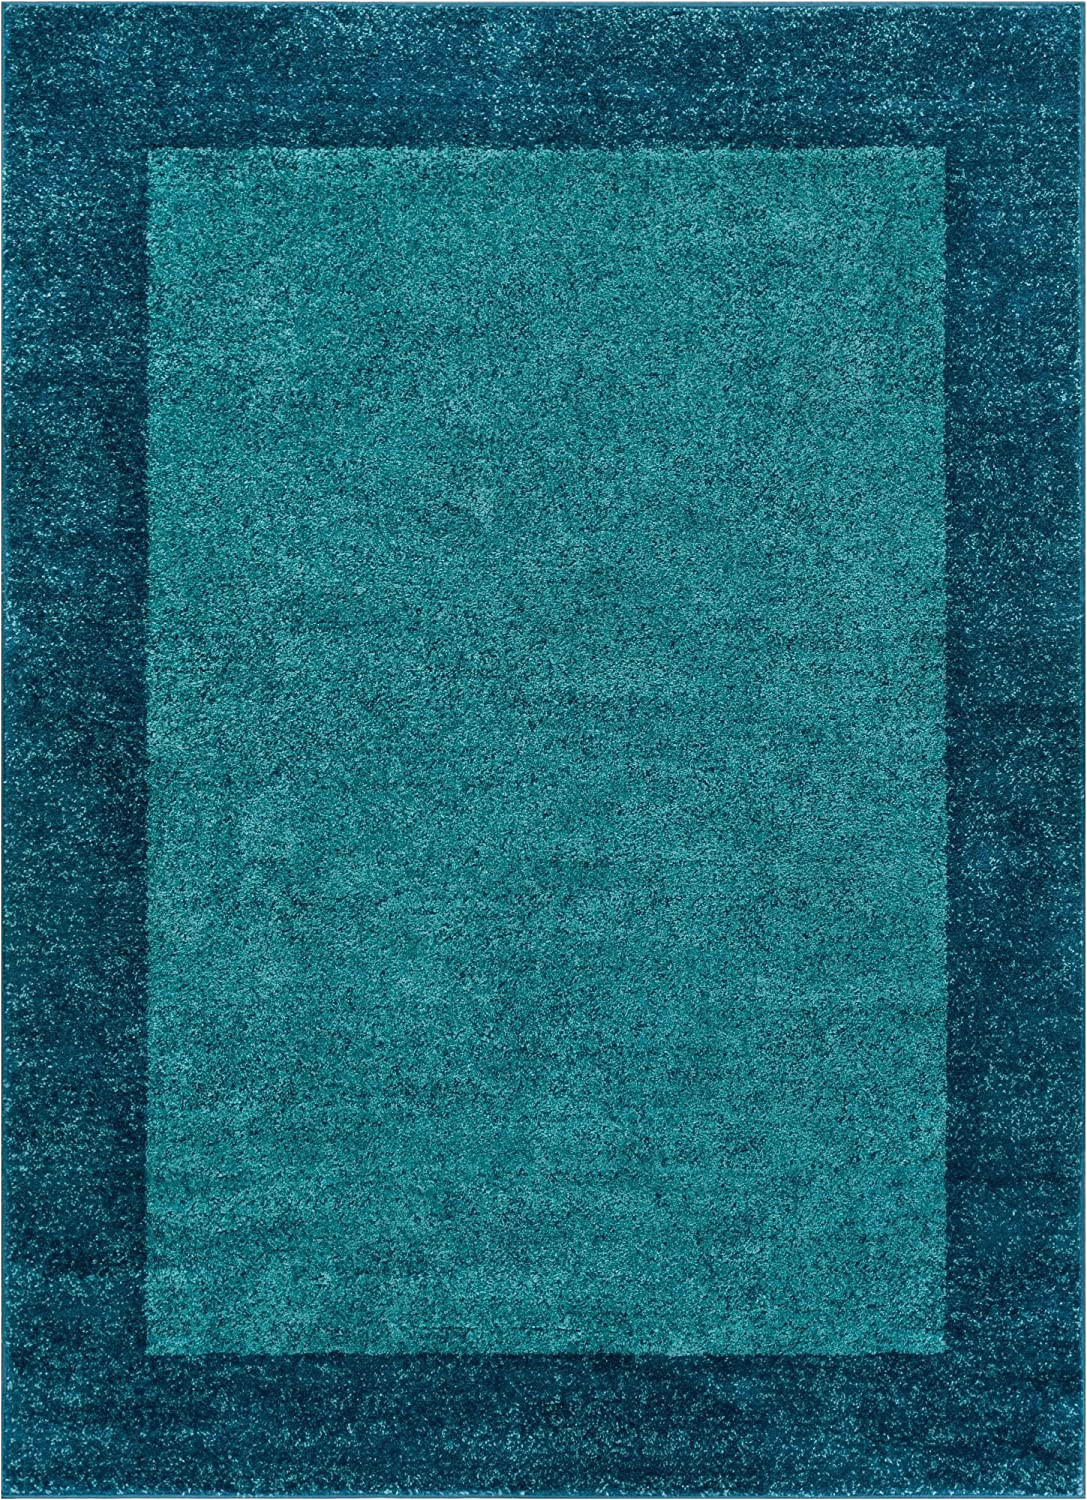 Plain Blue area Rug Well Woven Frontier Border Blue Modern Plain 8×11 710 X 106 area Rug Simple Geometric Pattern Contemporary Thick soft Plush